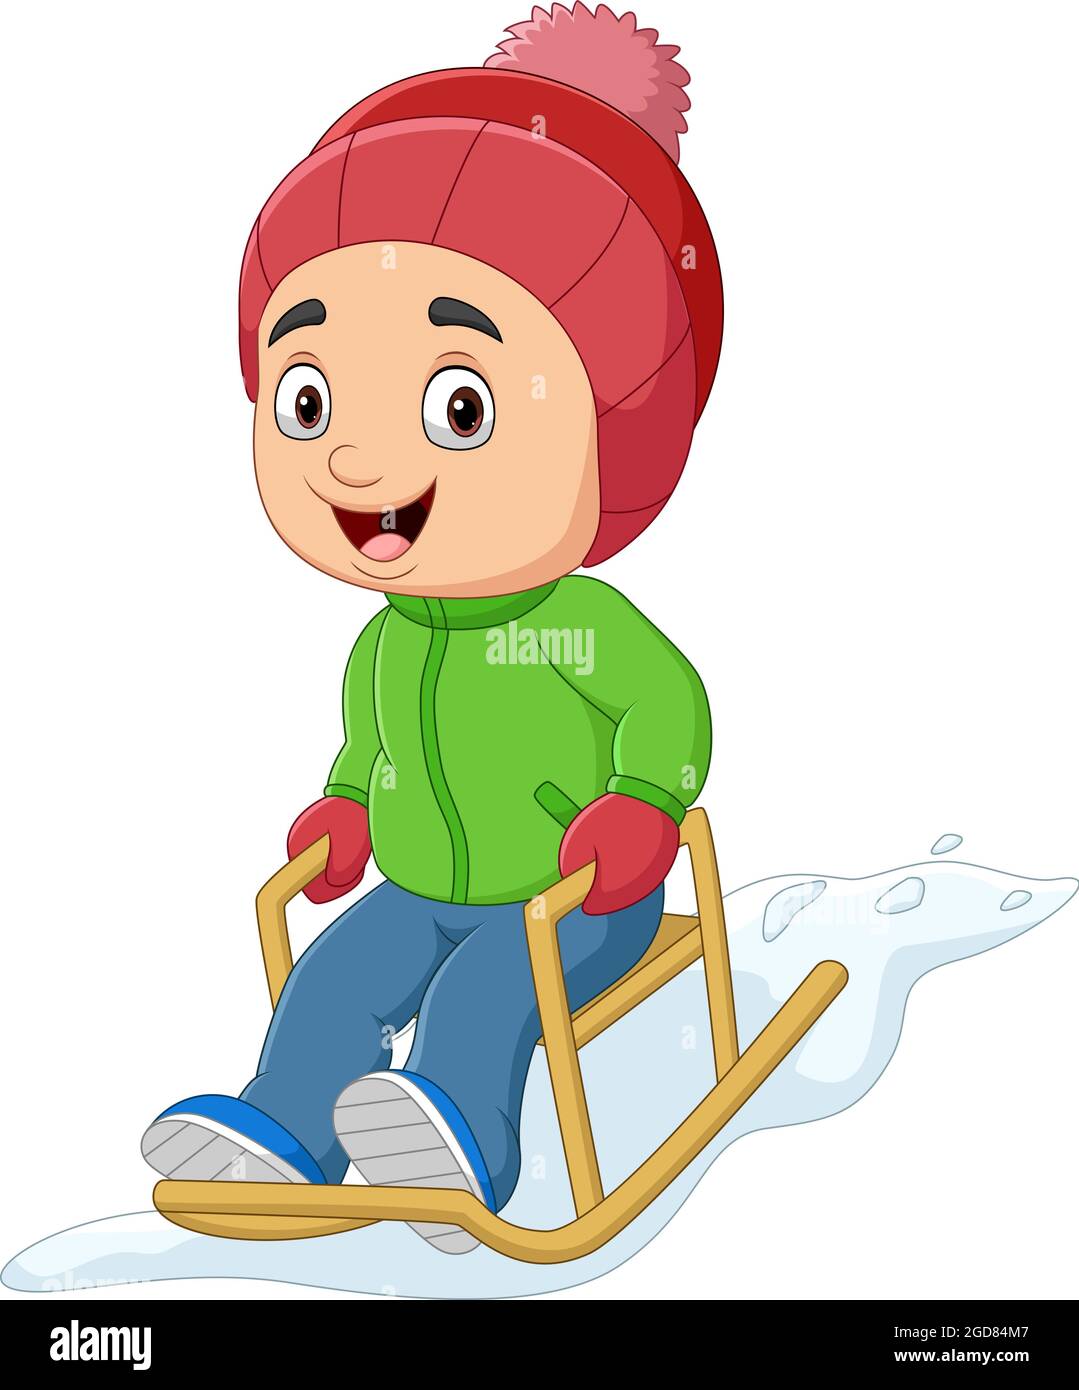 Young boy sledding downhill Cut Out Stock Images & Pictures - Alamy